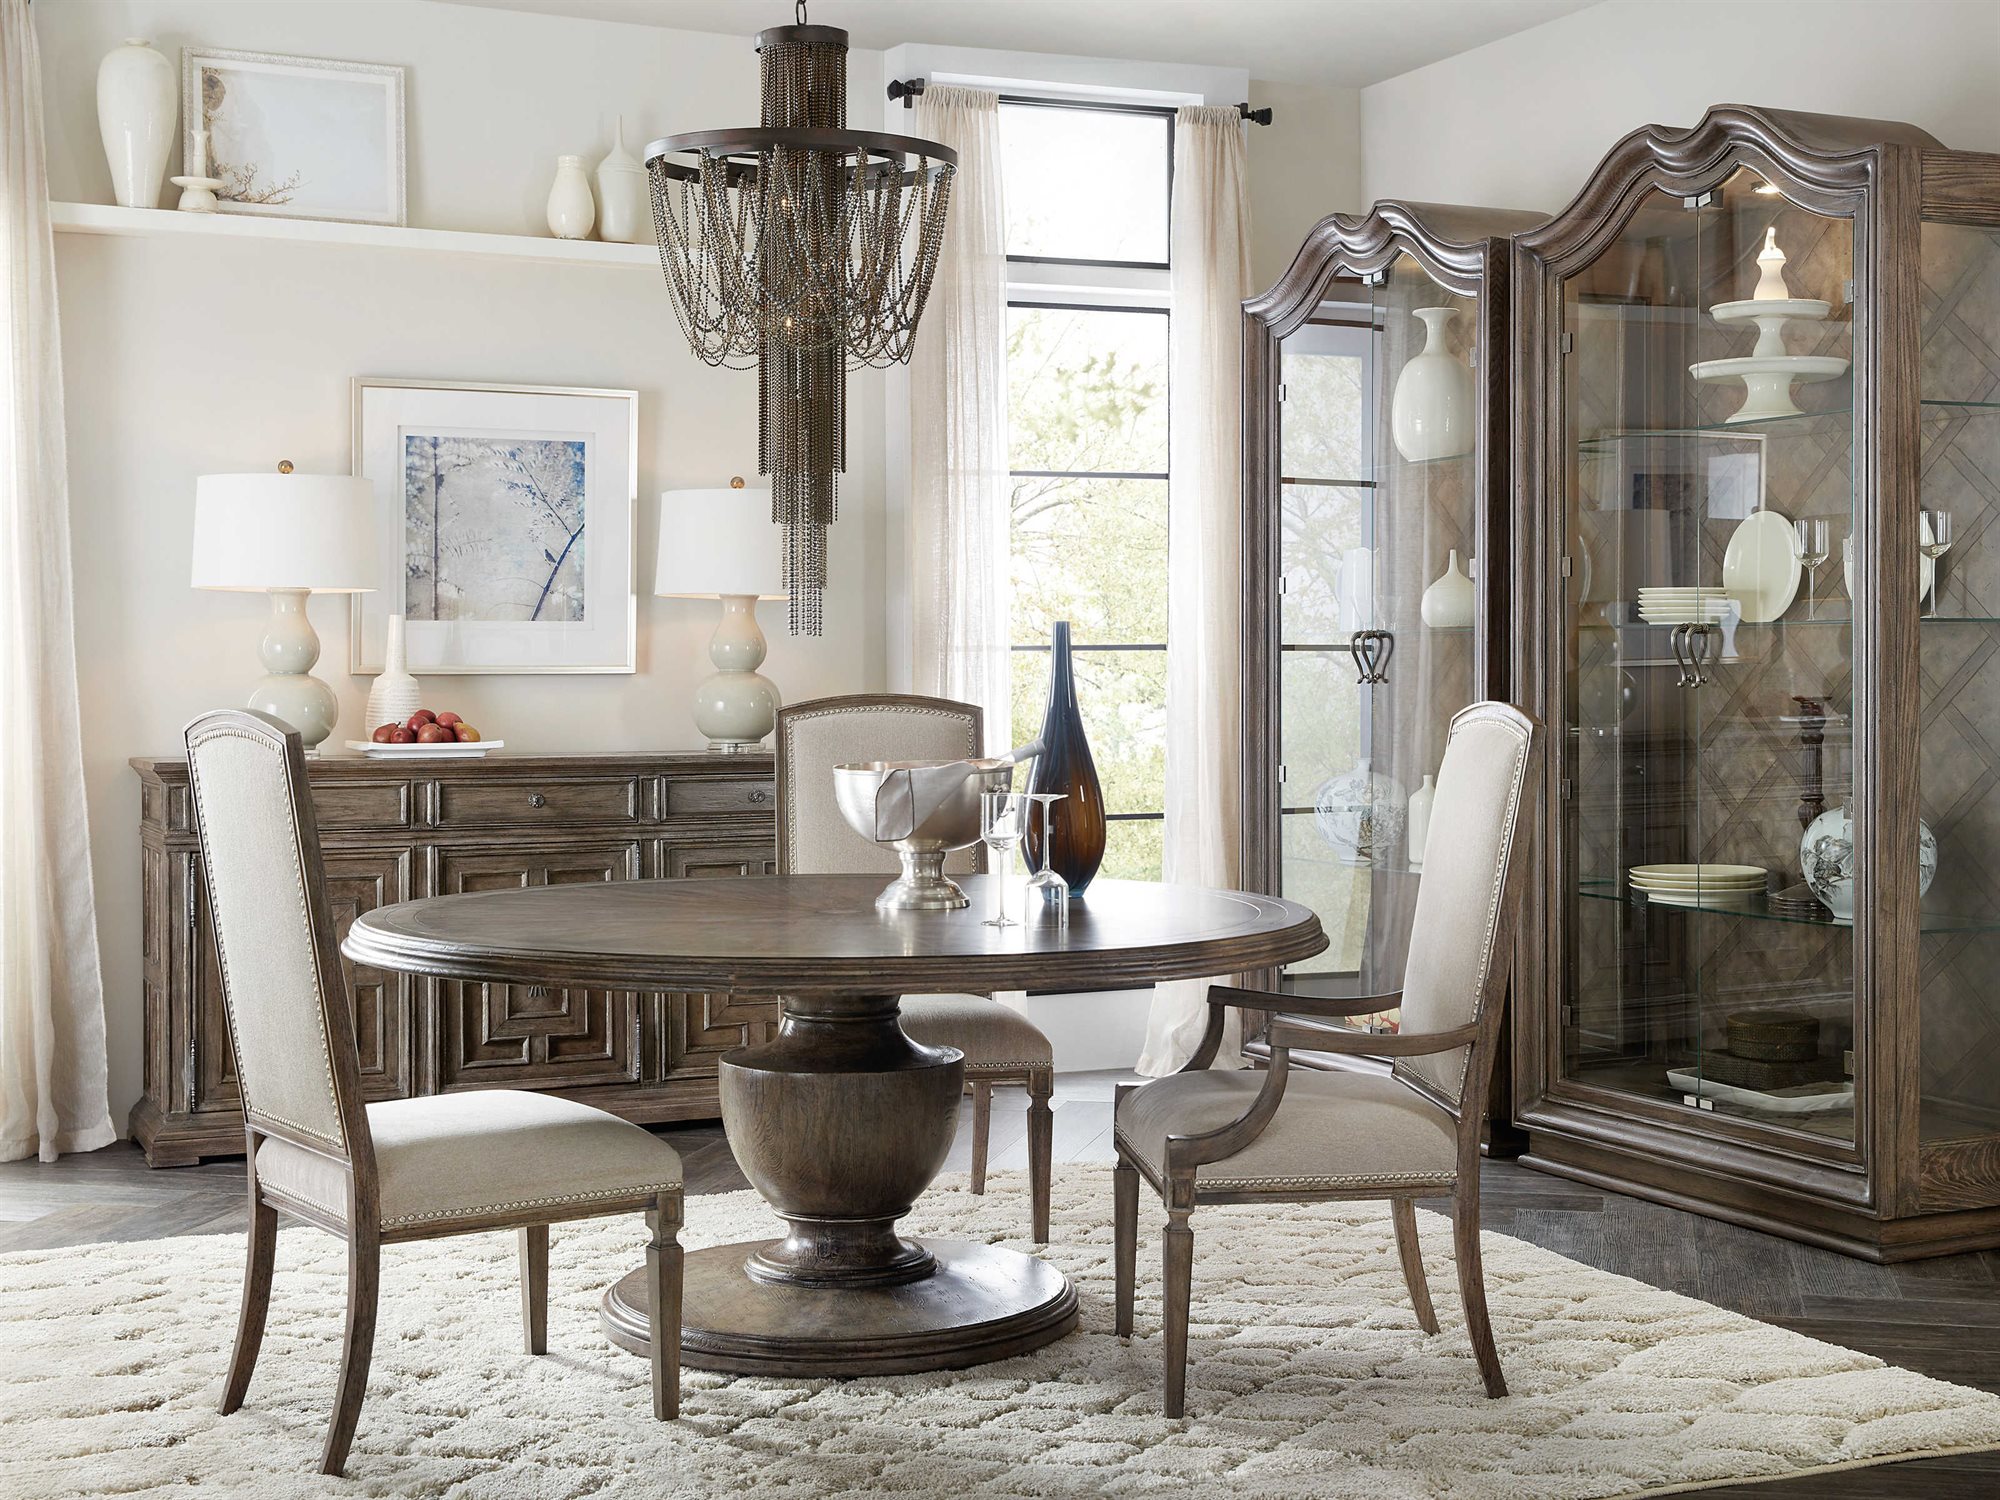 Hooker Dining Room With Beige Chair